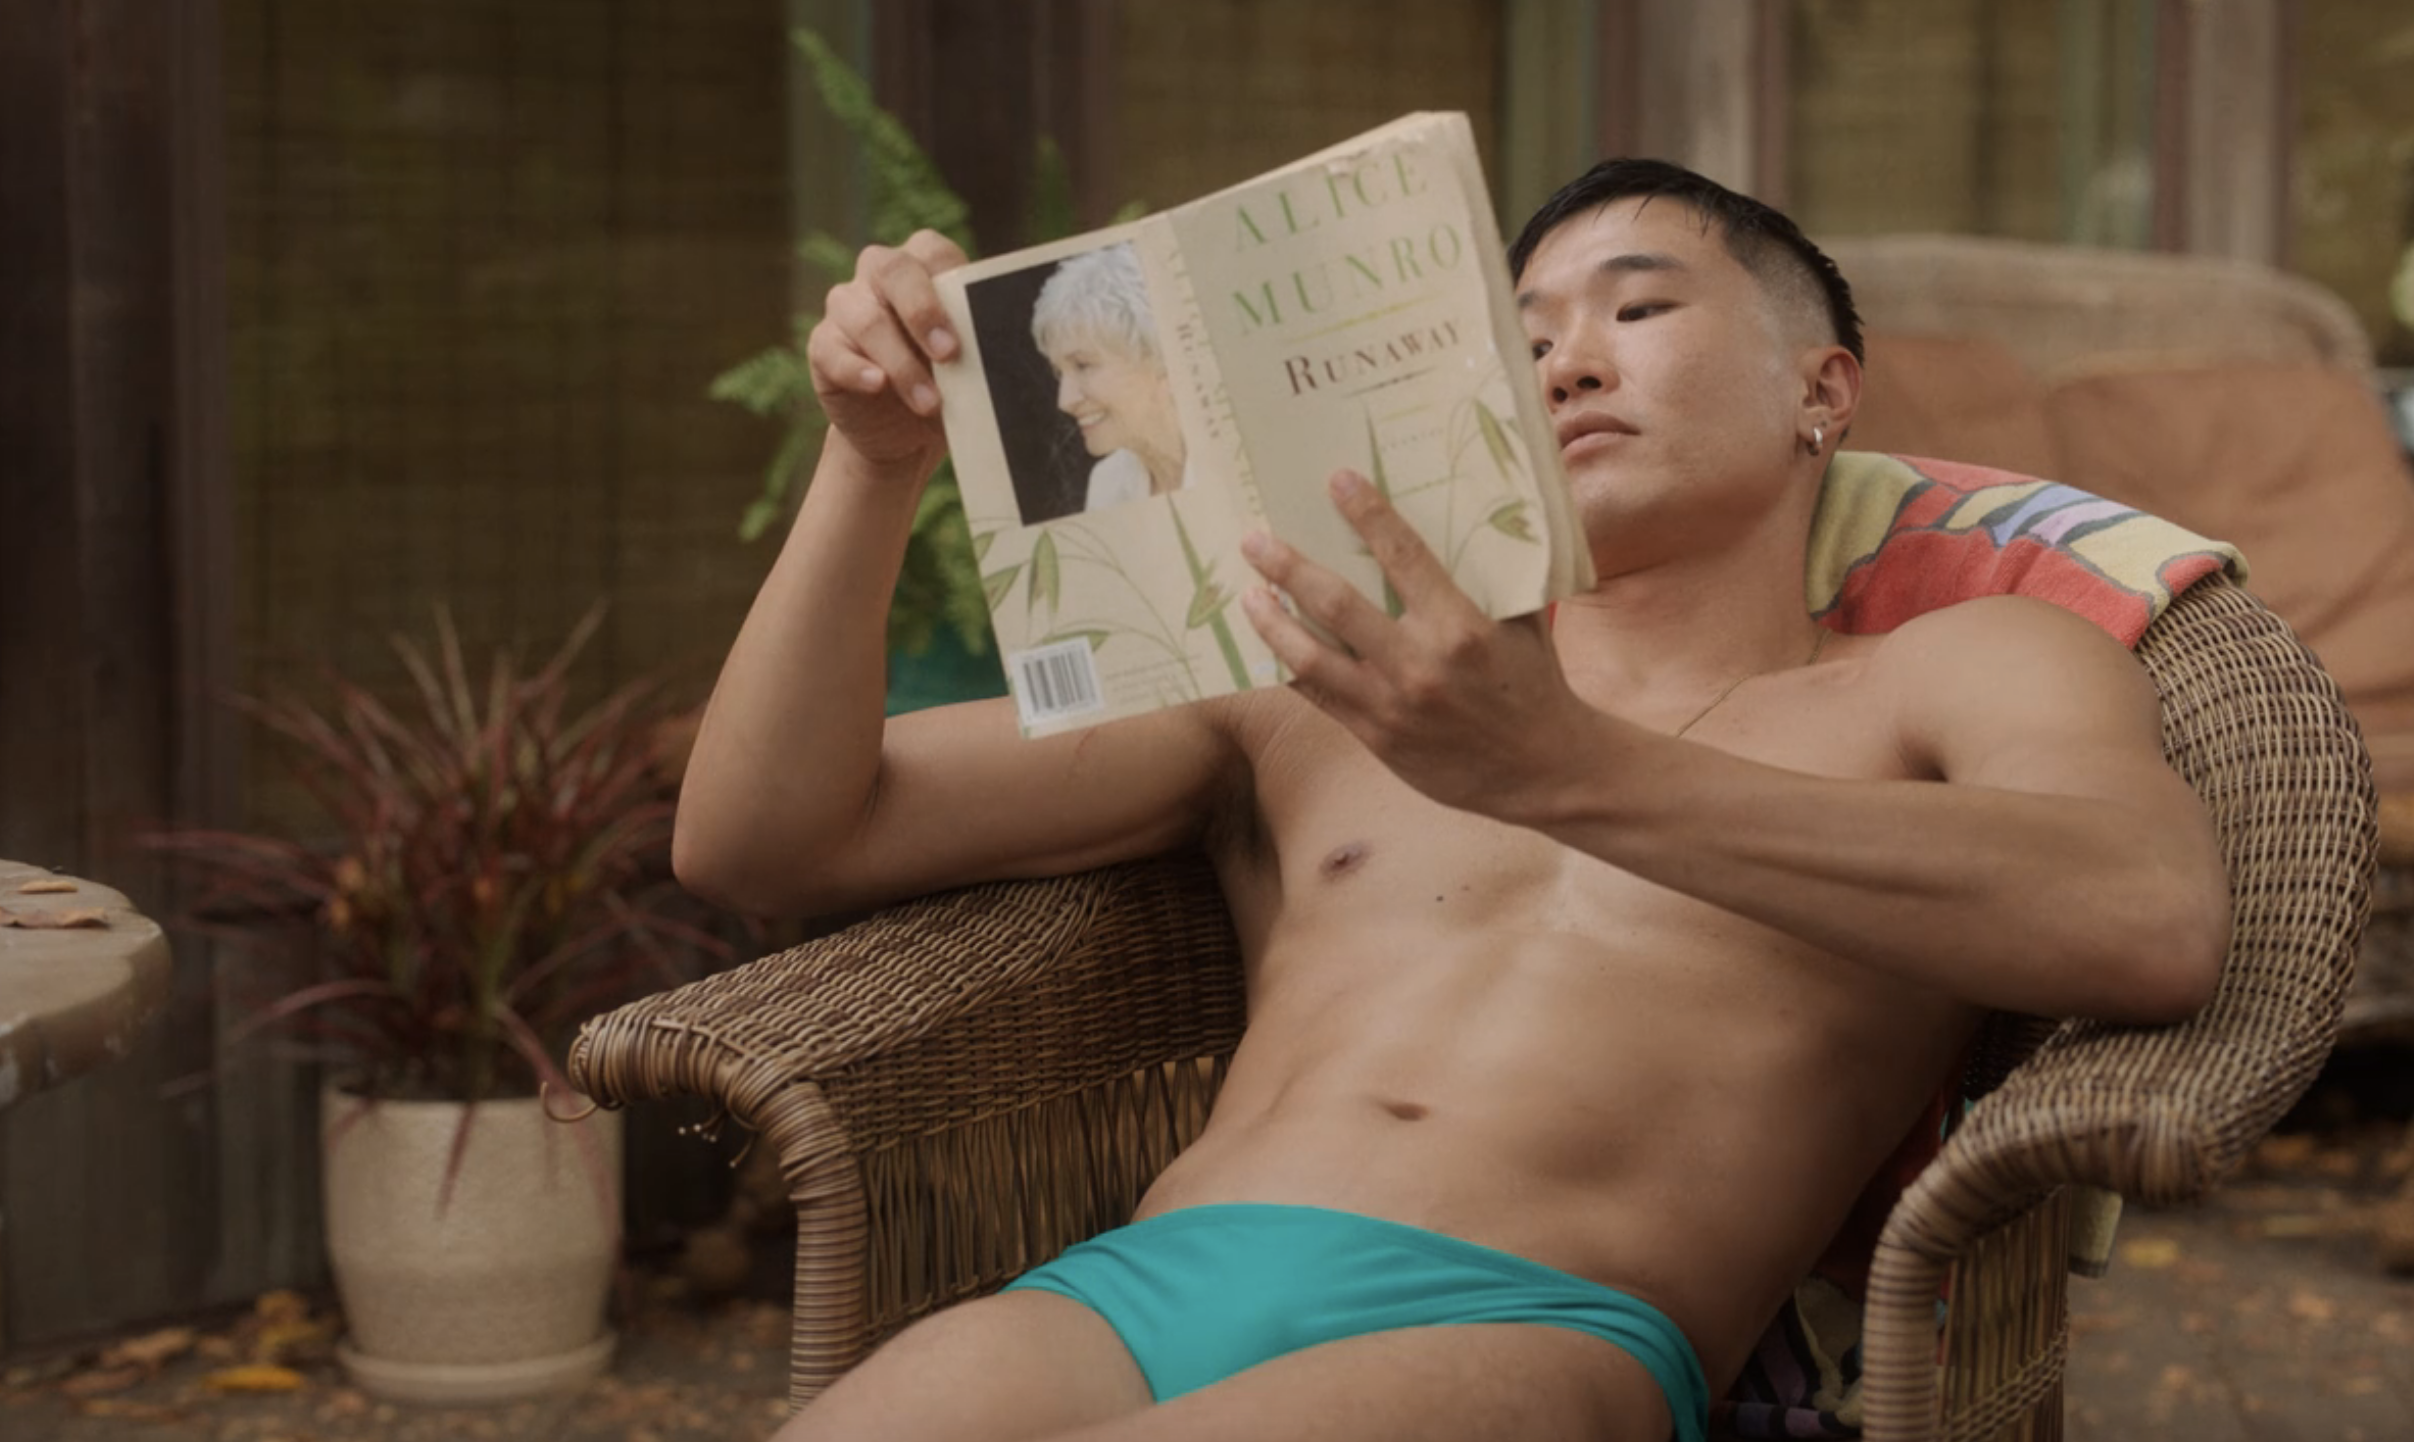 A man in briefs relaxing in a chair and reading Runaway by Alice Munro